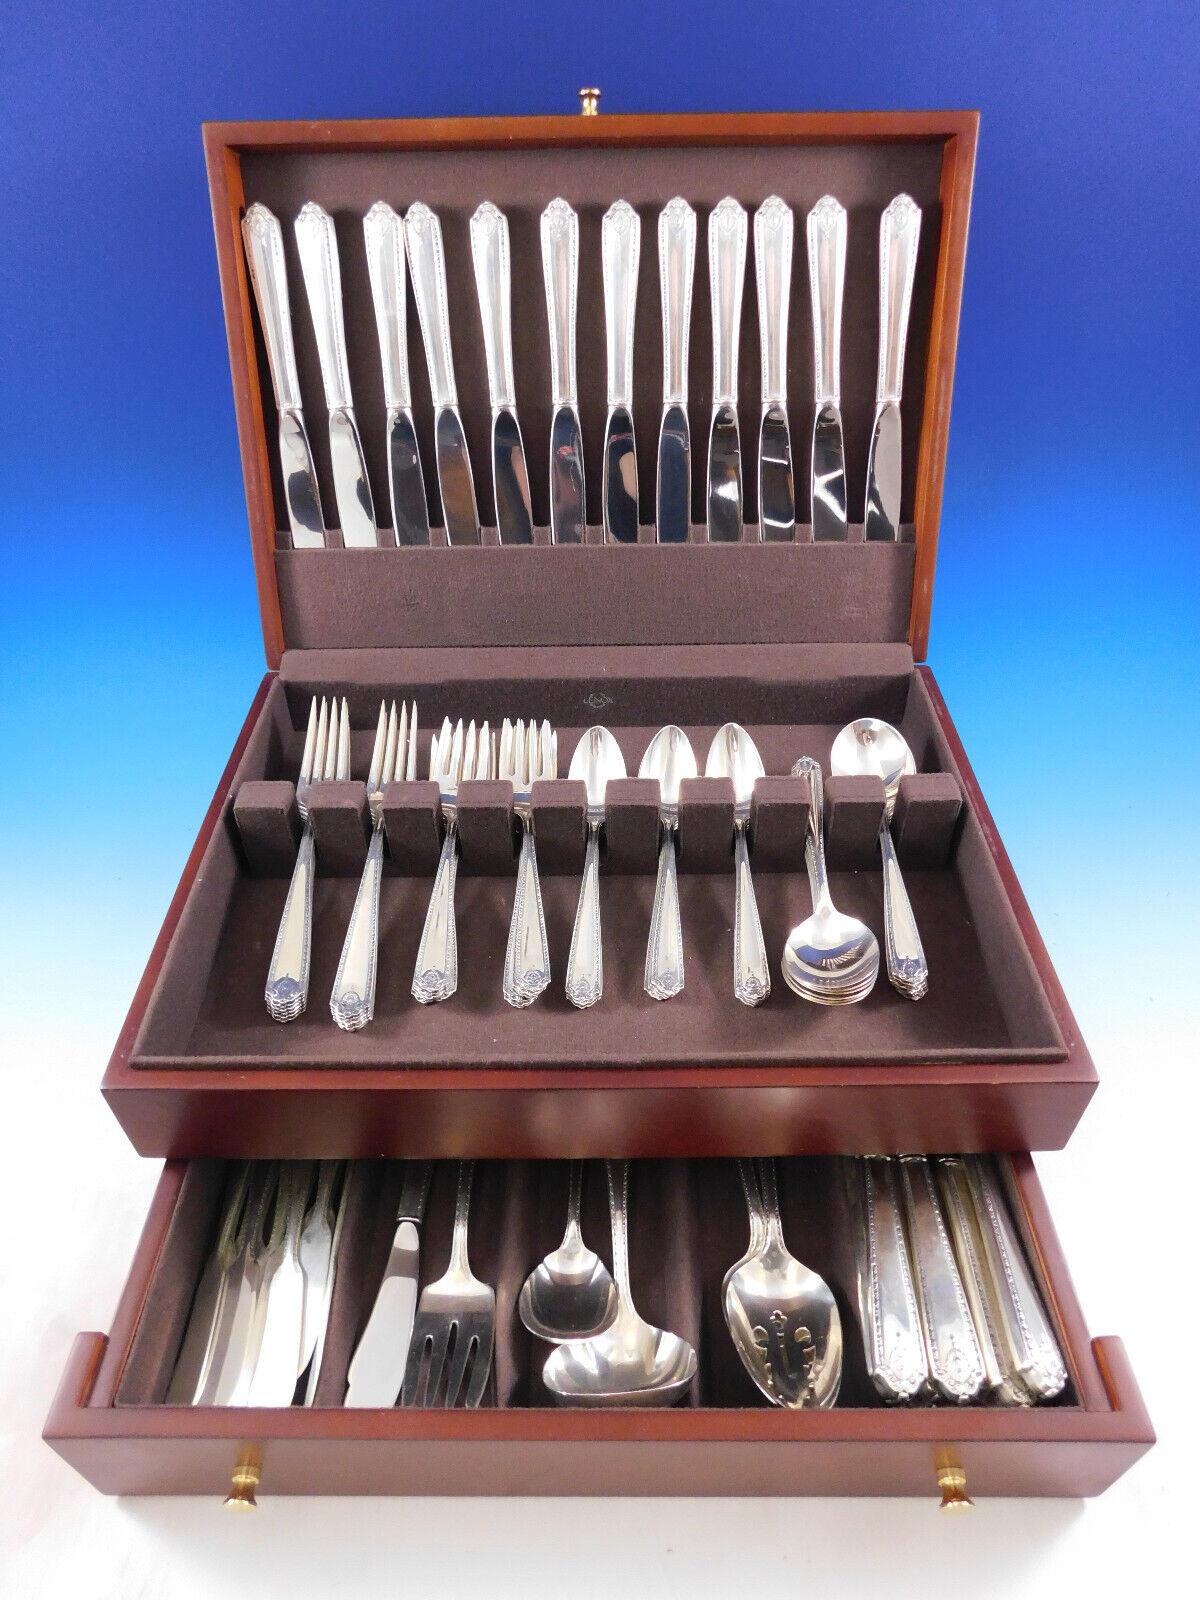 Gorgeous Lady Hilton by Westmorland sterling silver flatware set - 90 pieces. This set includes:

12 knives, modern, 9